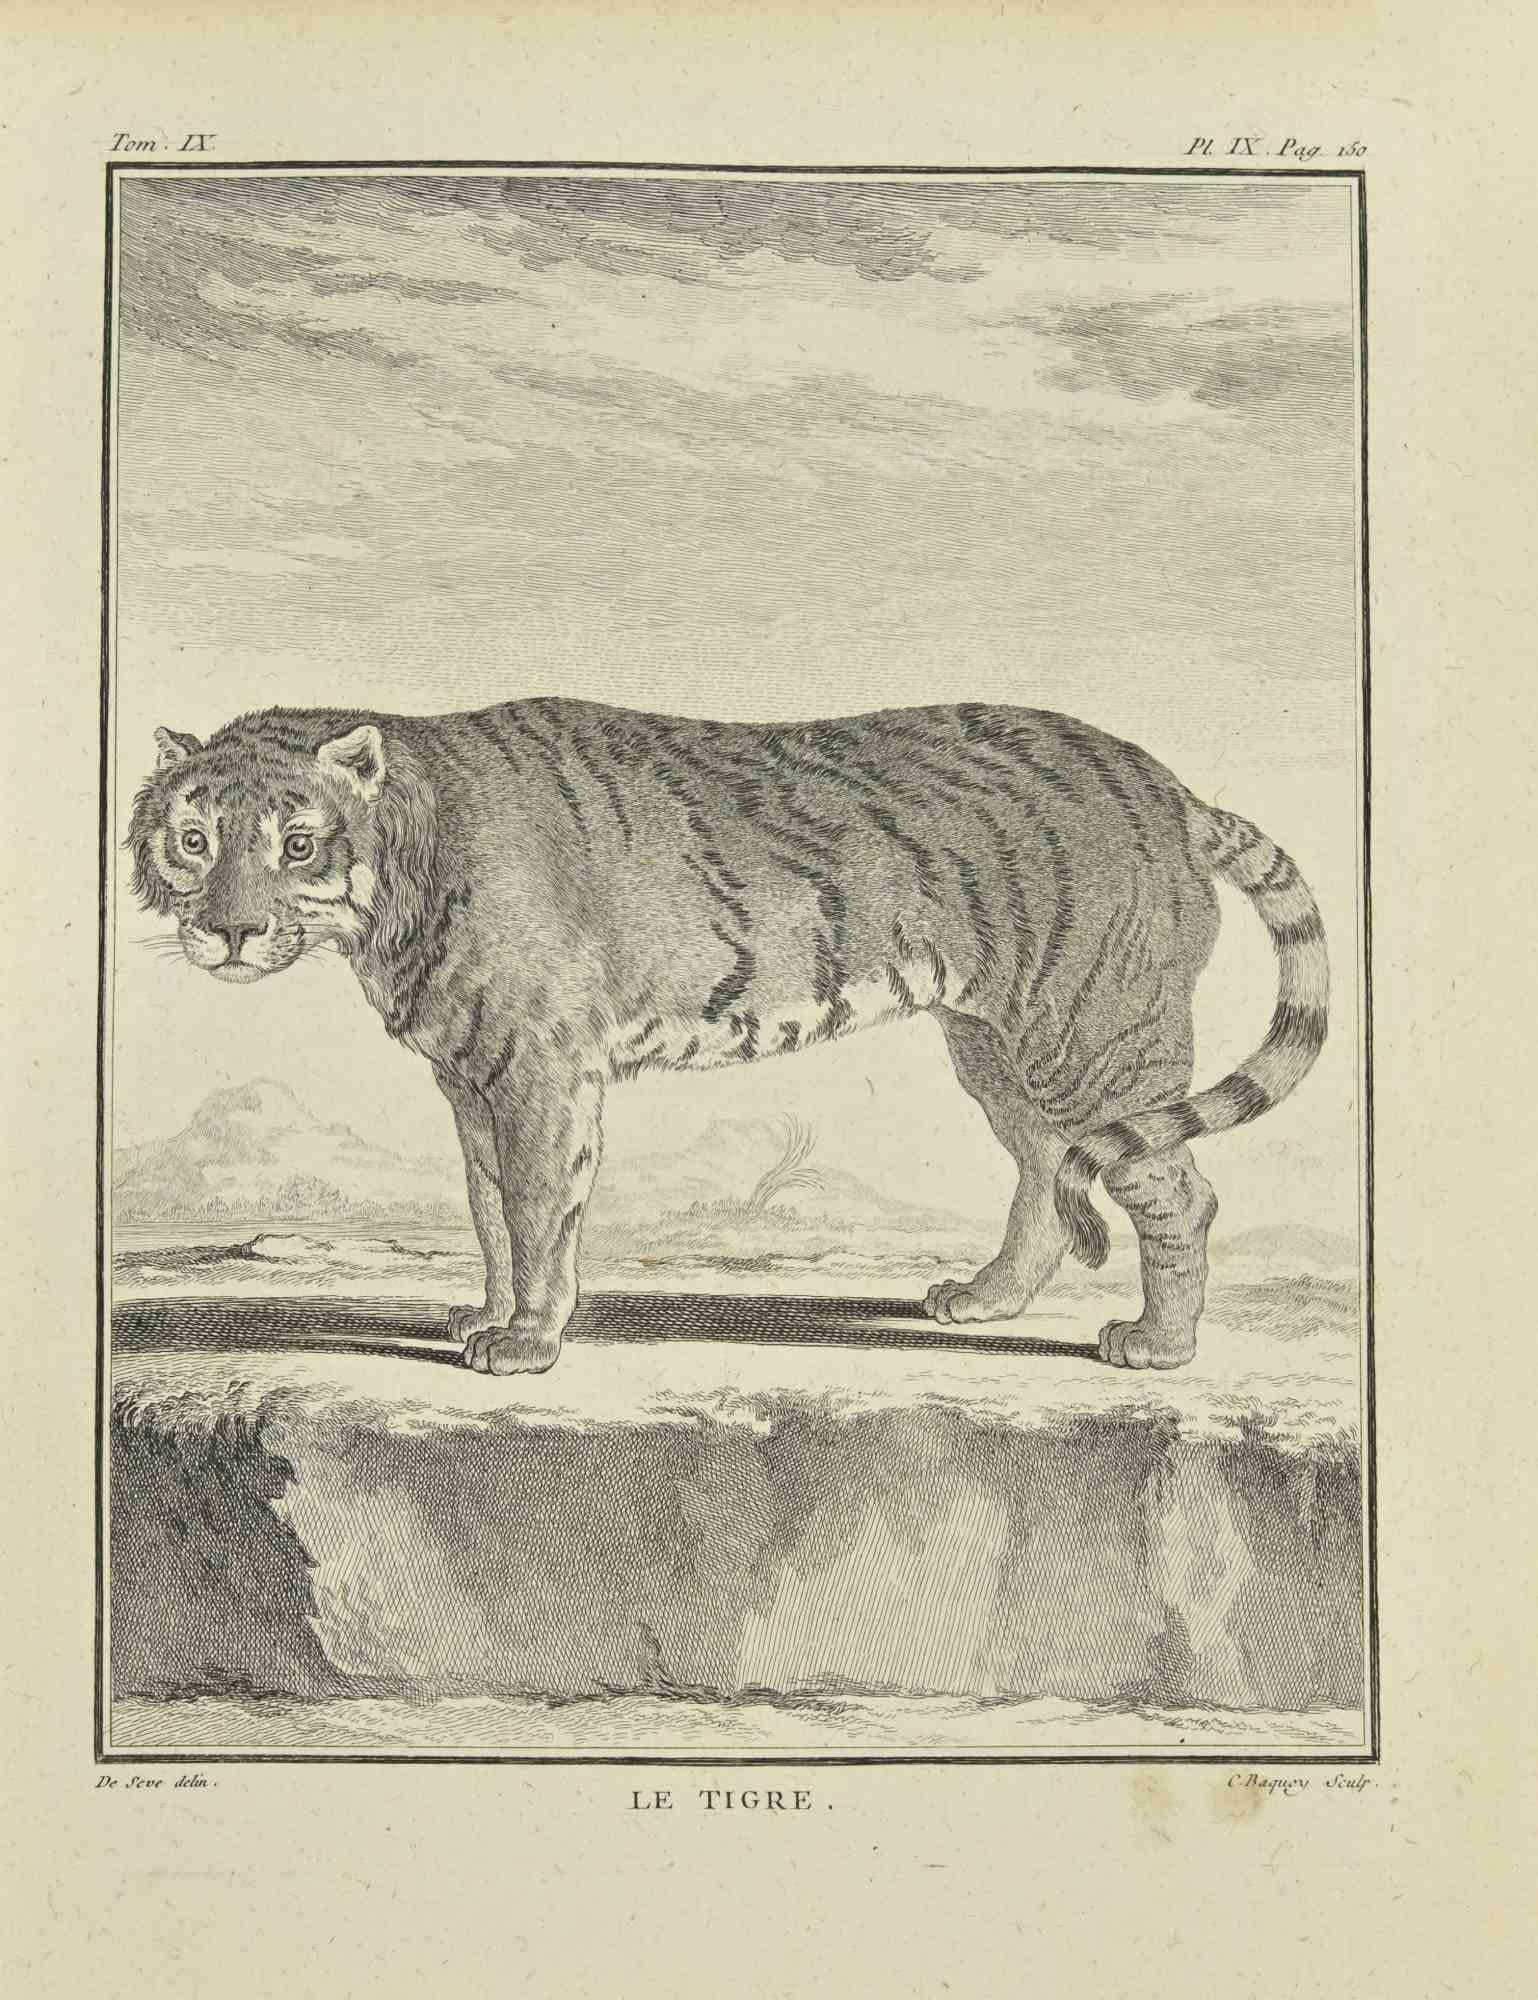 Le Tigre is an etching realized by Jean Charles Baquoy in 1771.

It belongs to the suite "Histoire Naturelle de Buffon".

The Artist's signature is engraved lower right.

Good conditions with slight foxing.